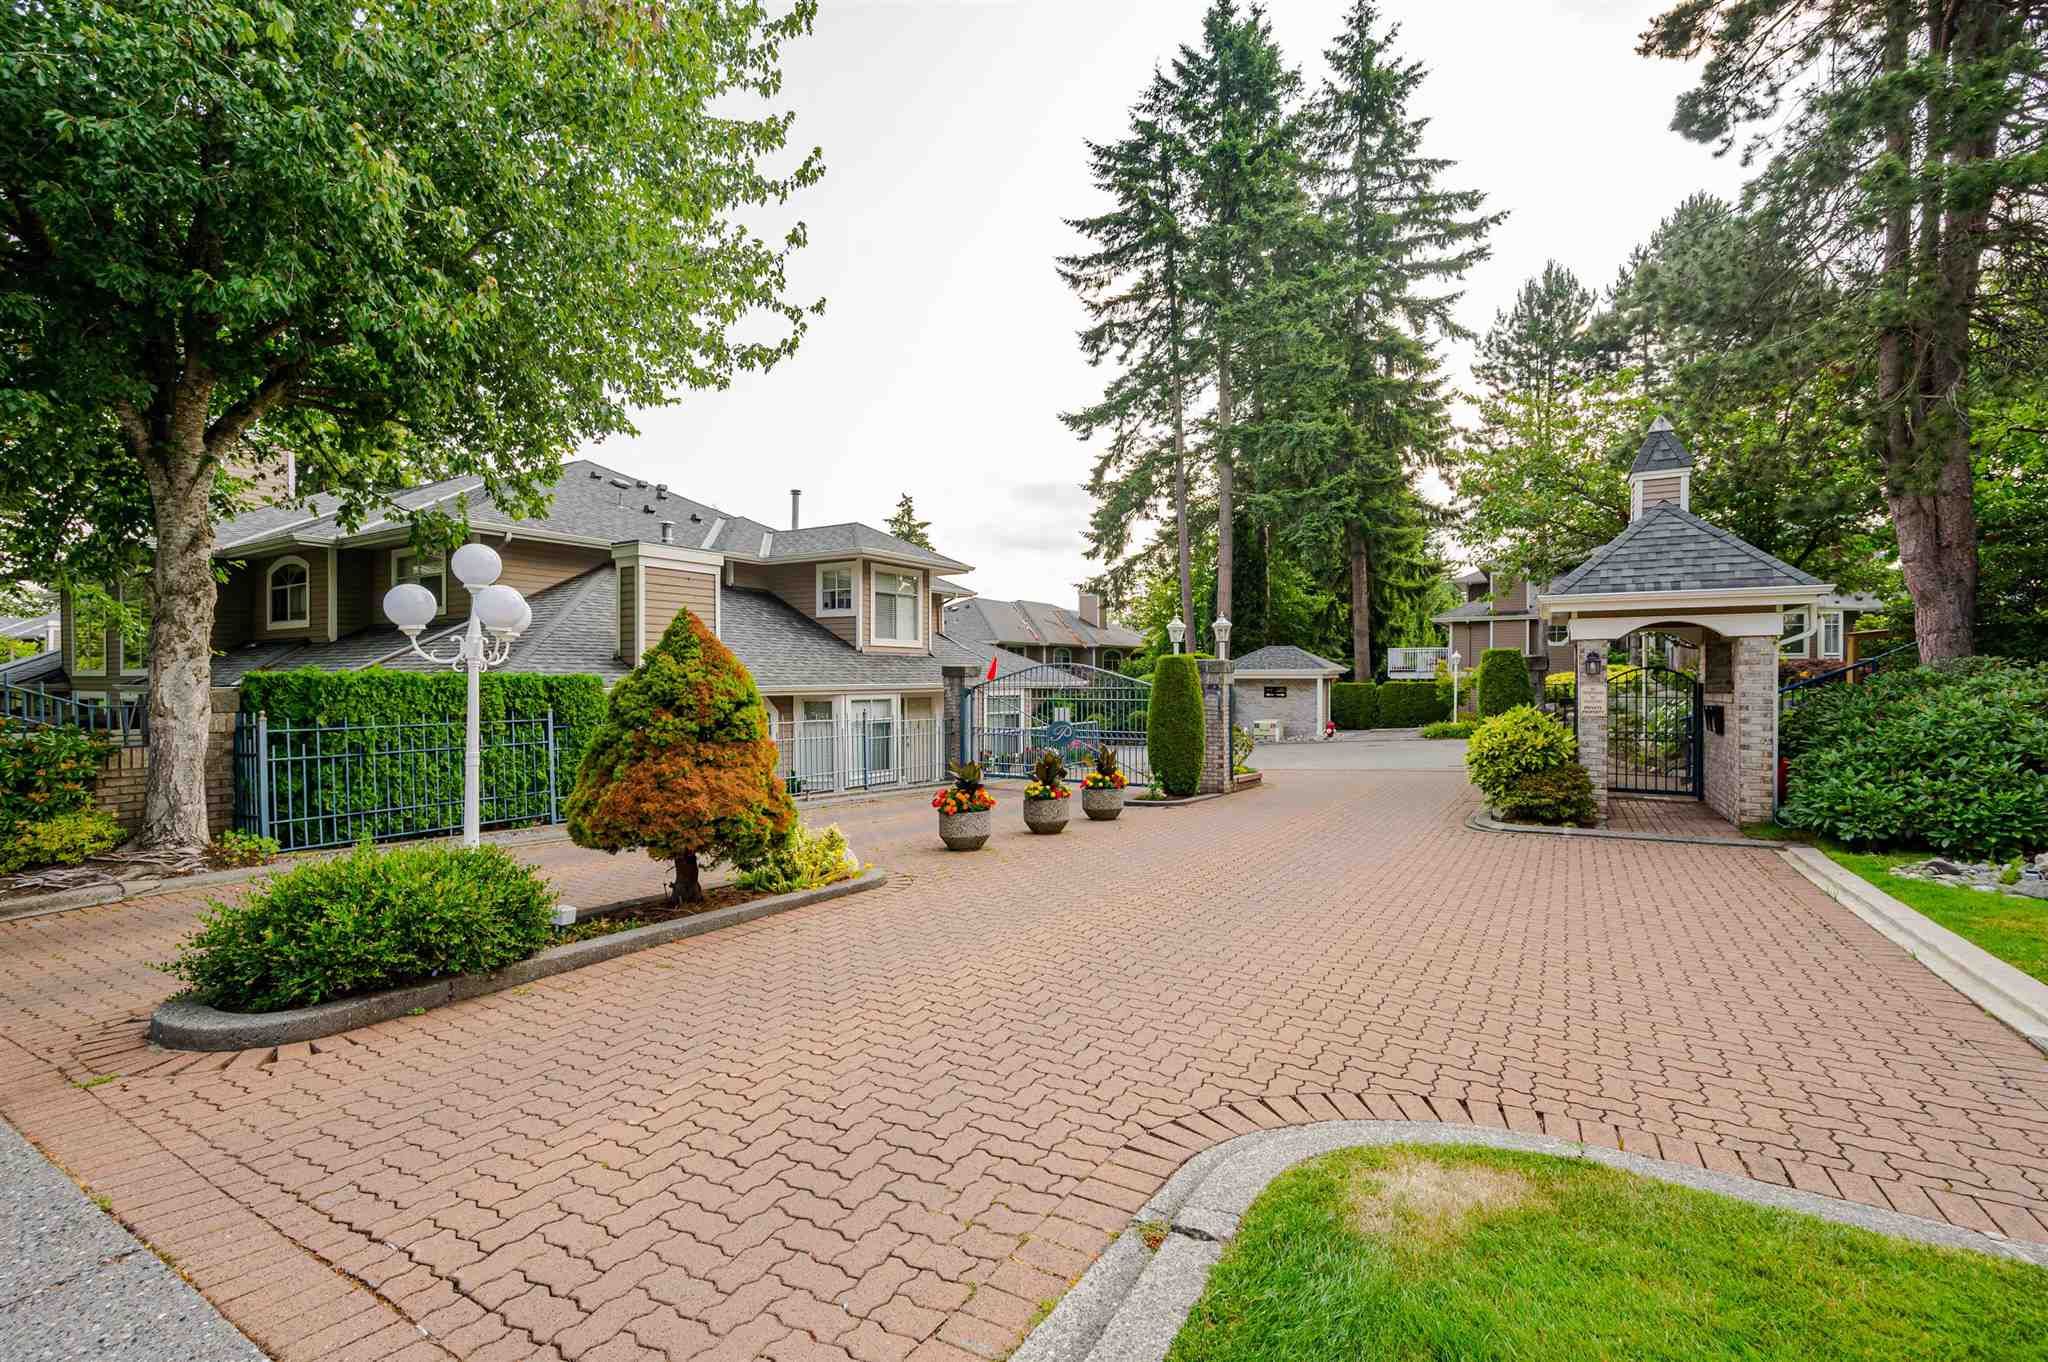 Main Photo: 92 2500 152 STREET in Surrey: Sunnyside Park Surrey Townhouse for sale (South Surrey White Rock)  : MLS®# R2598326